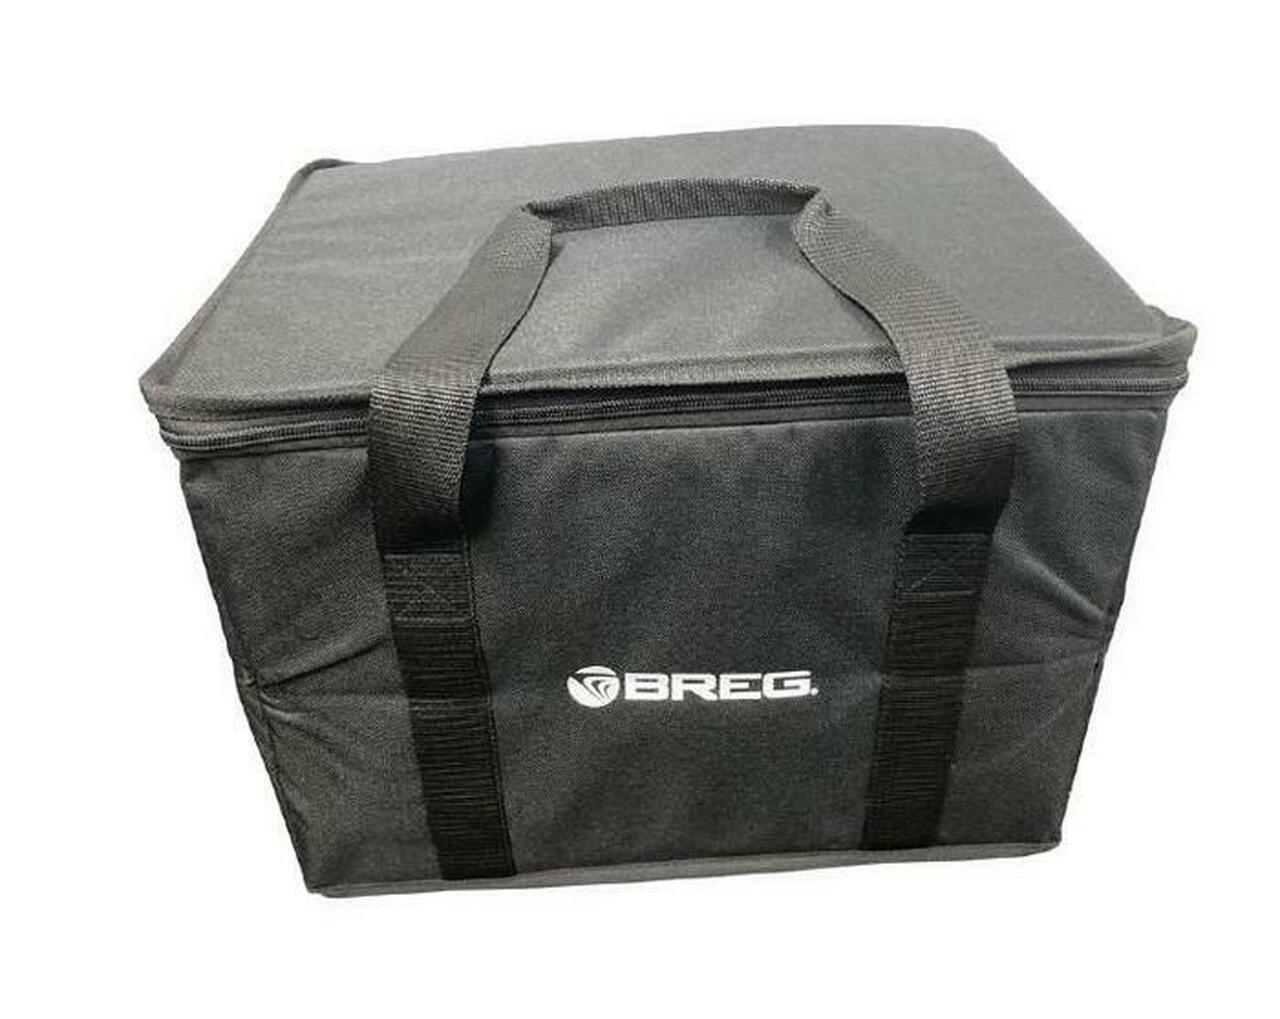 Breg Polar Care Carrying Case - SourceColdTherapy